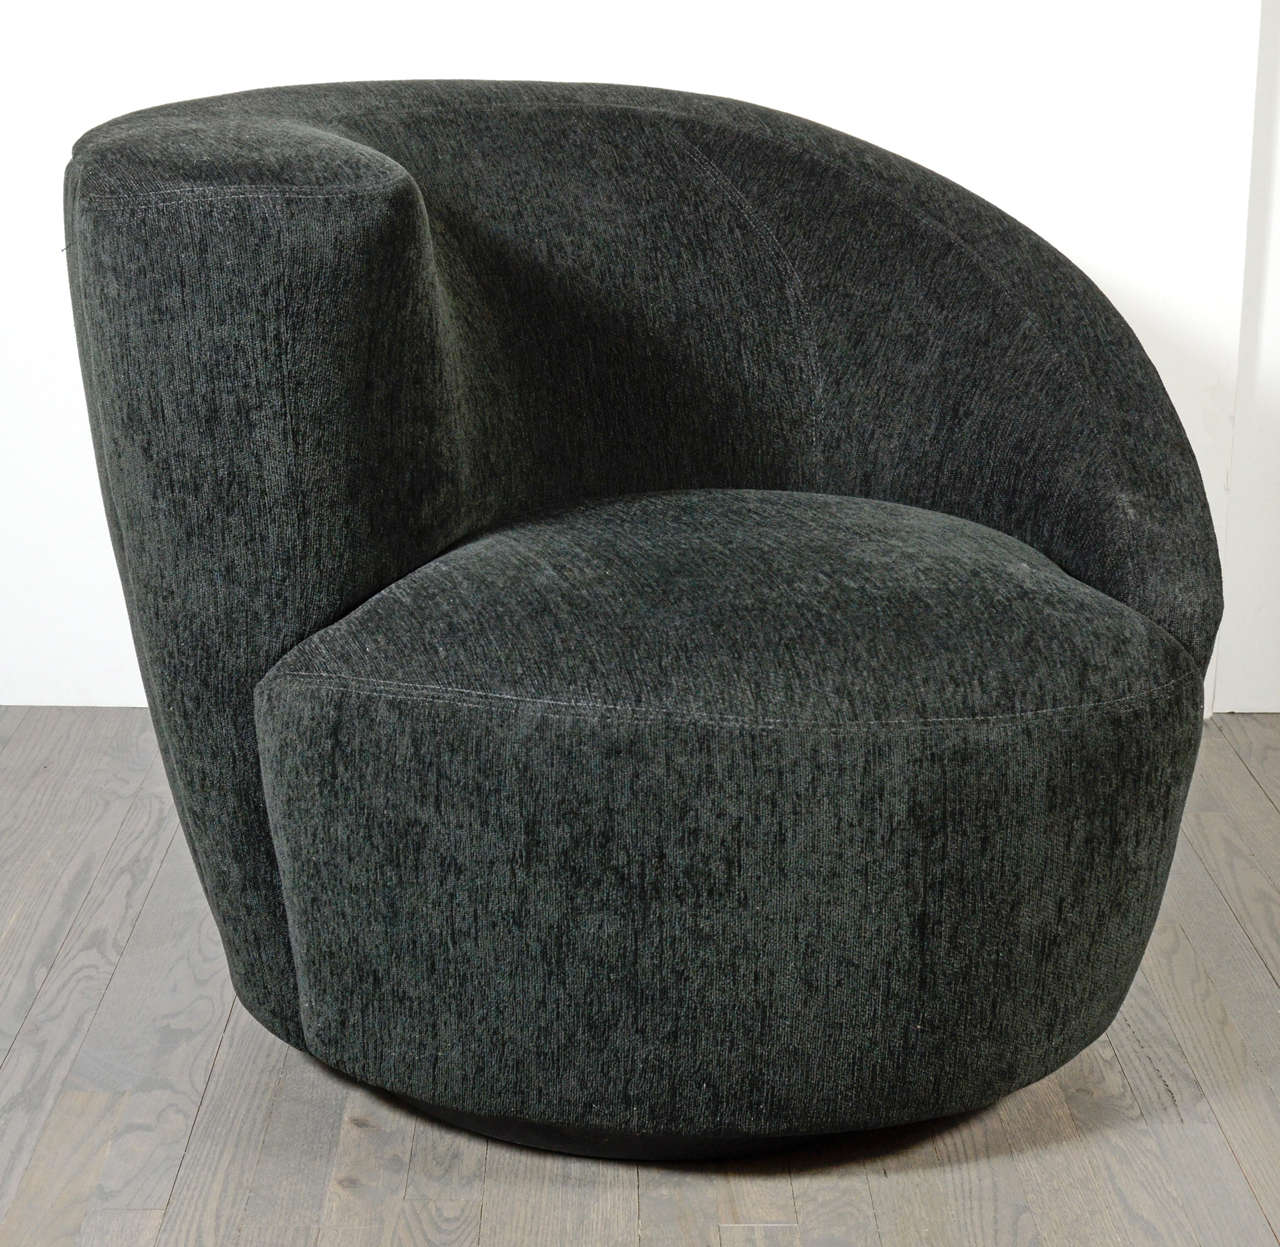 This pair of sculptural Modernist asymmetrical swivel chairs by Vladimir Kagan, newly upholstered in a lux black velvet fabric.